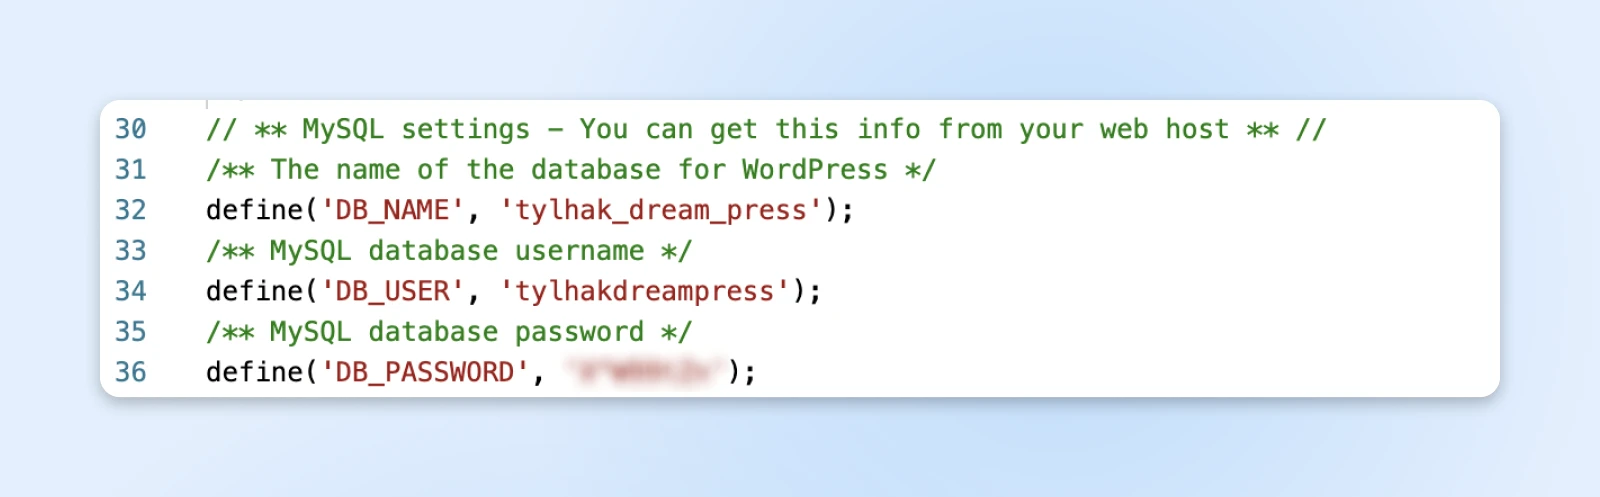 WordPress database configuration code with variable definitions for database name, username, and password.